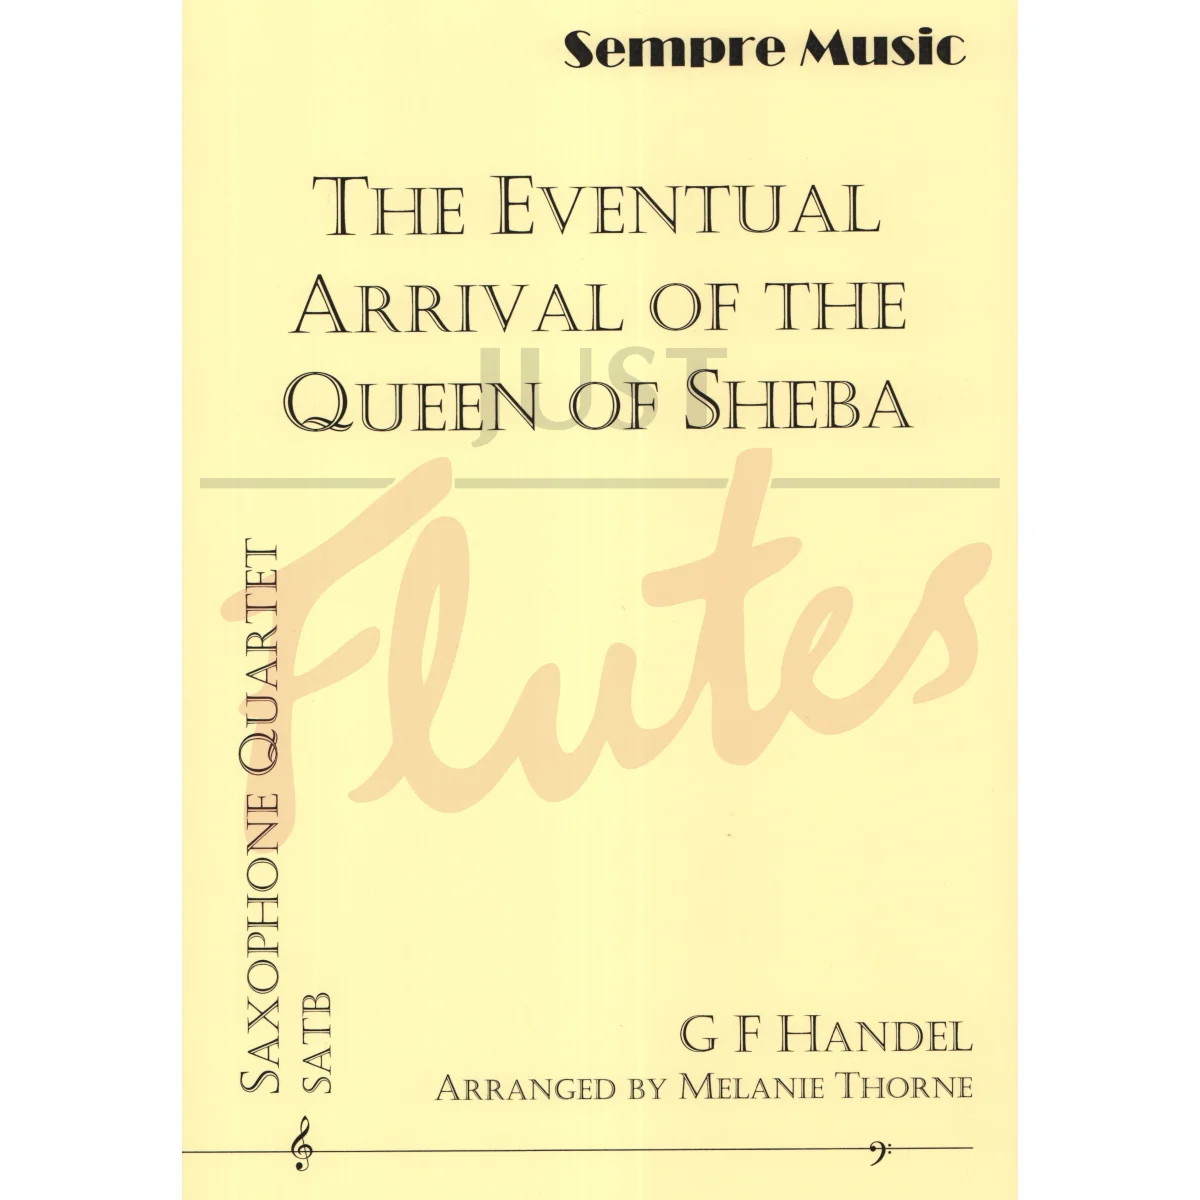 The Eventual Arrival of the Queen of Sheba for Saxophone Quartet